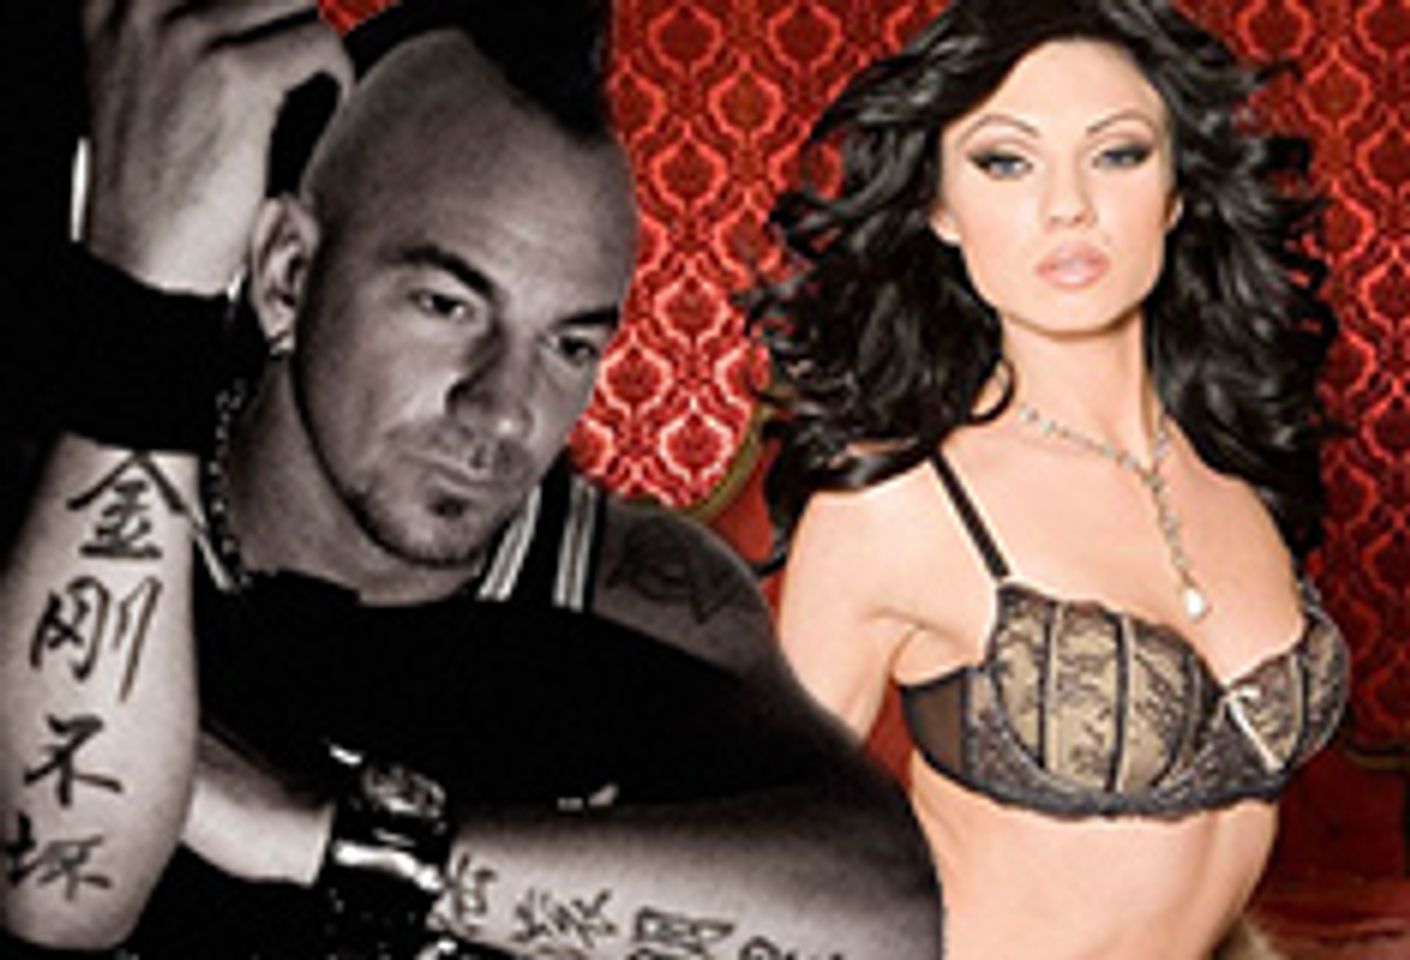 Craven Moorehead, Ava Rose to Appear at 5th Annual Halloween Lingerie and Costume Ball